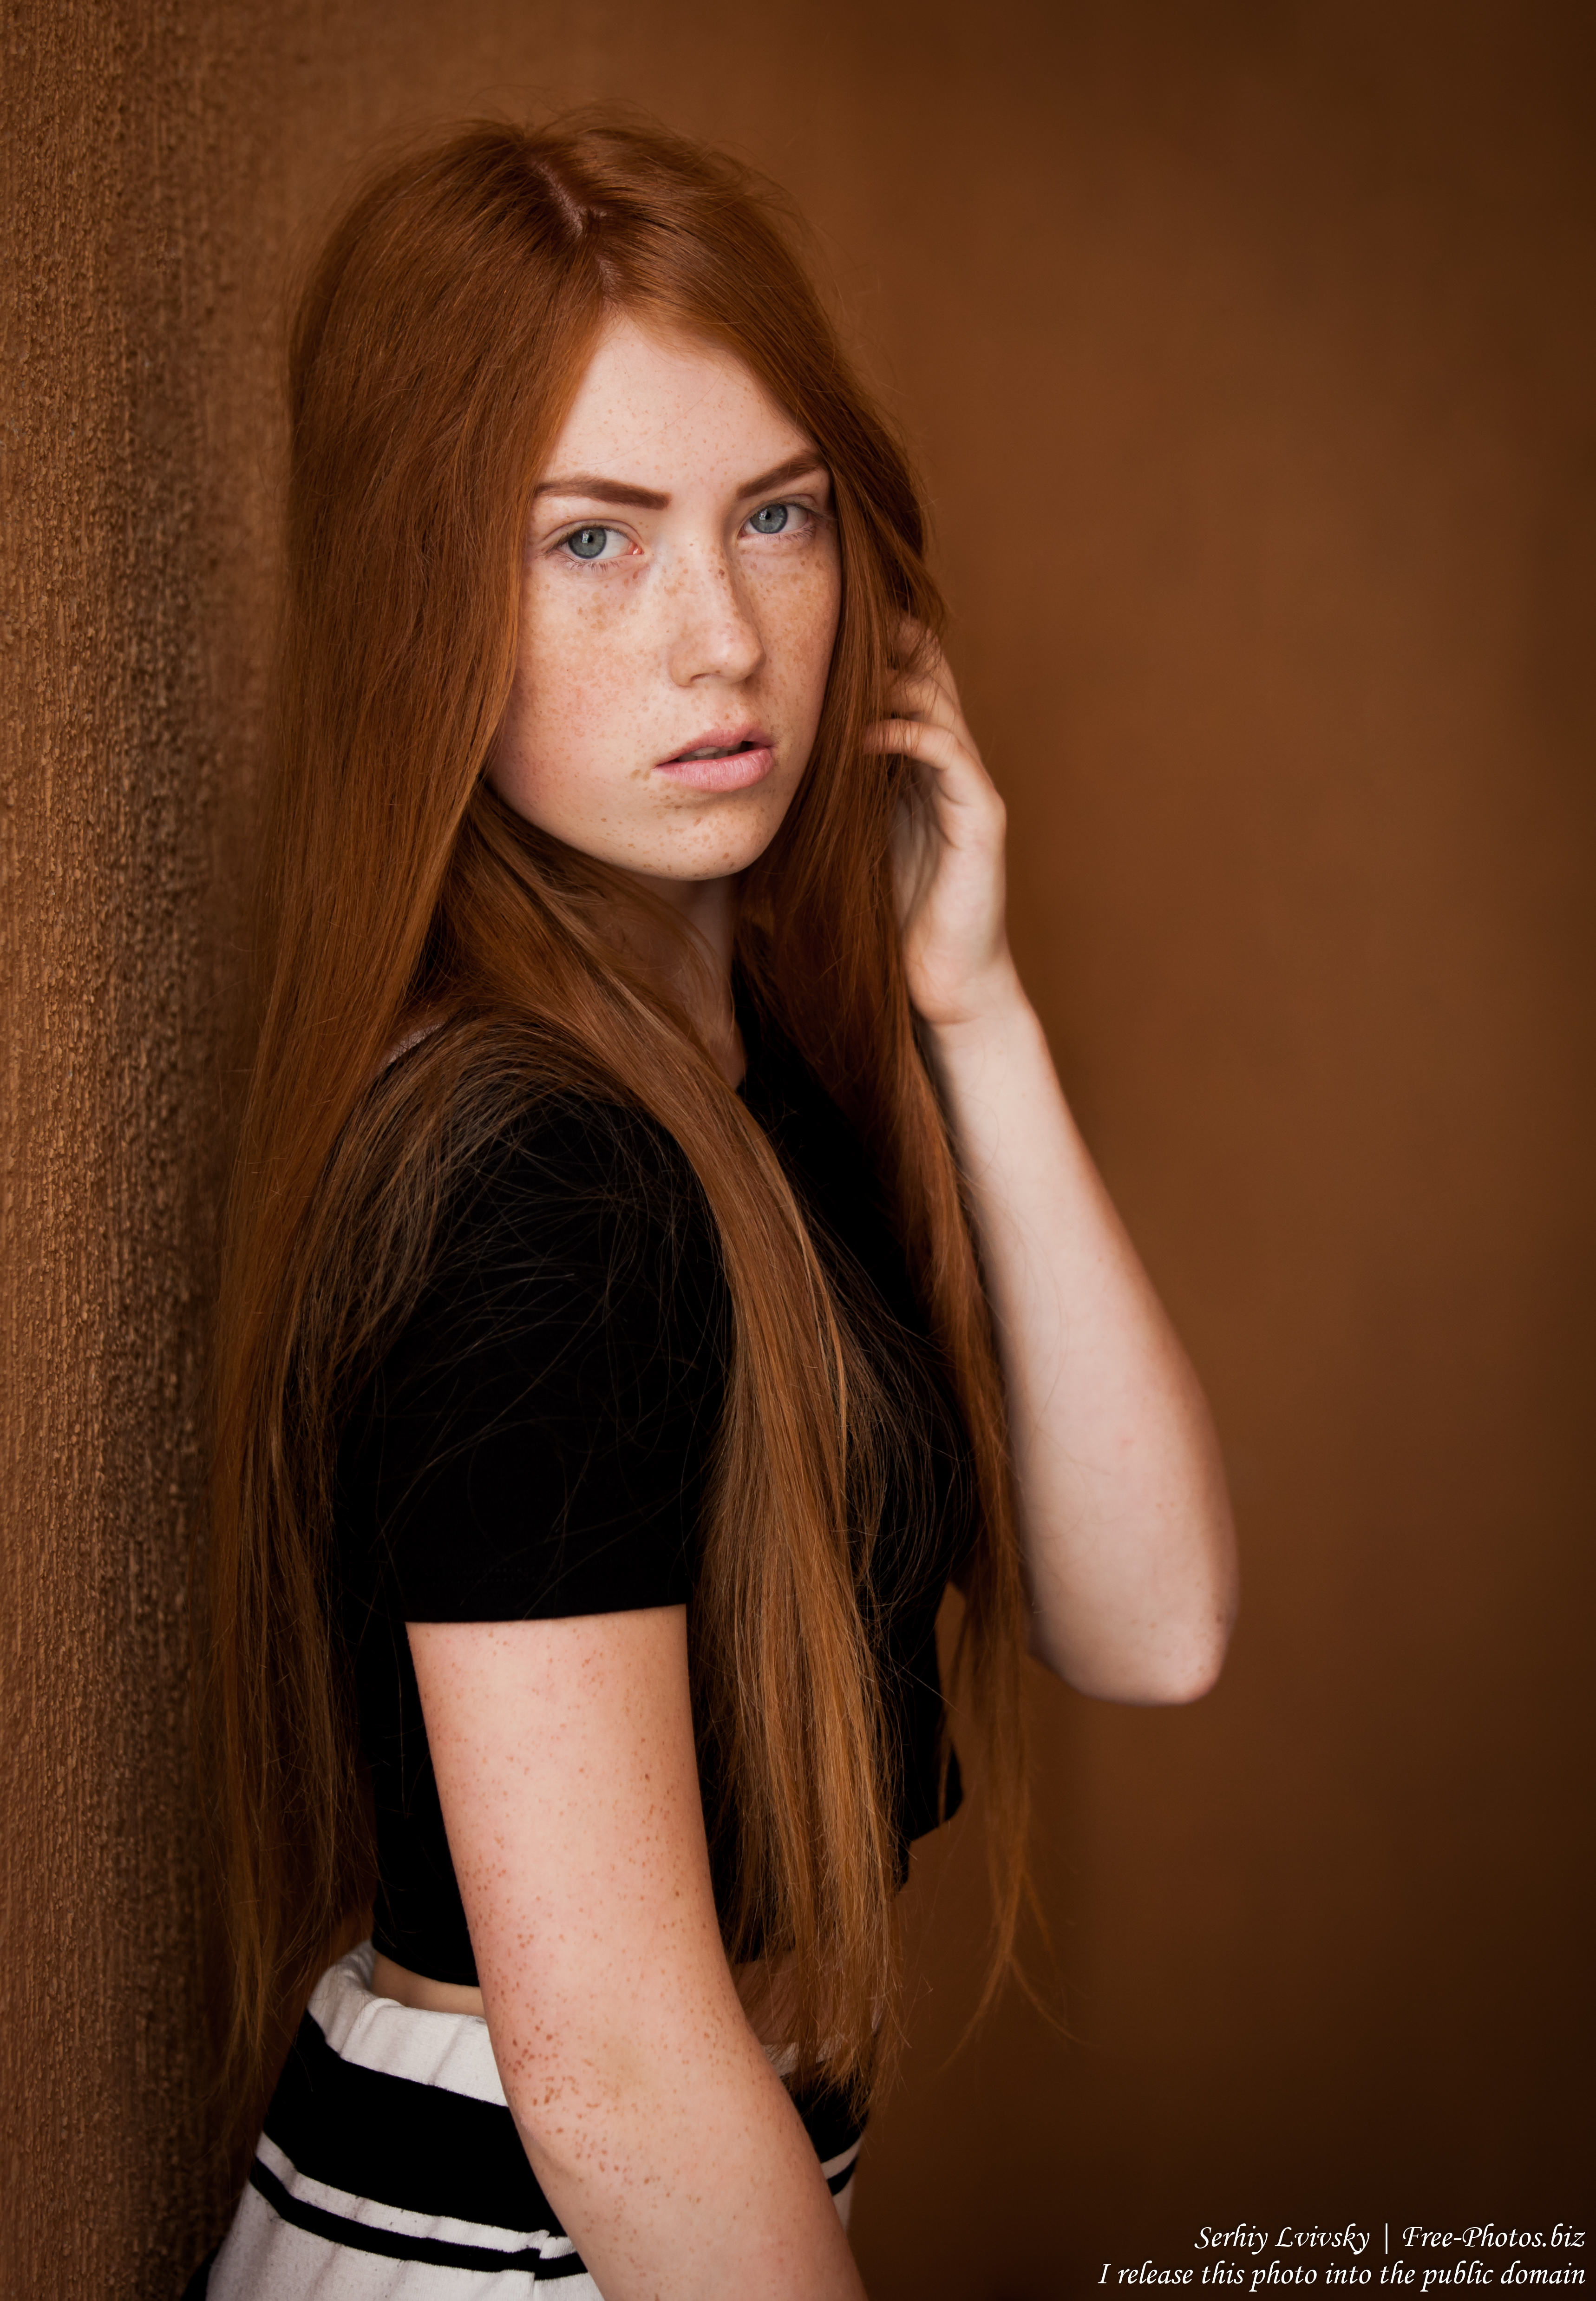 Photo of a 15-year-old red-haired Catholic girl ...